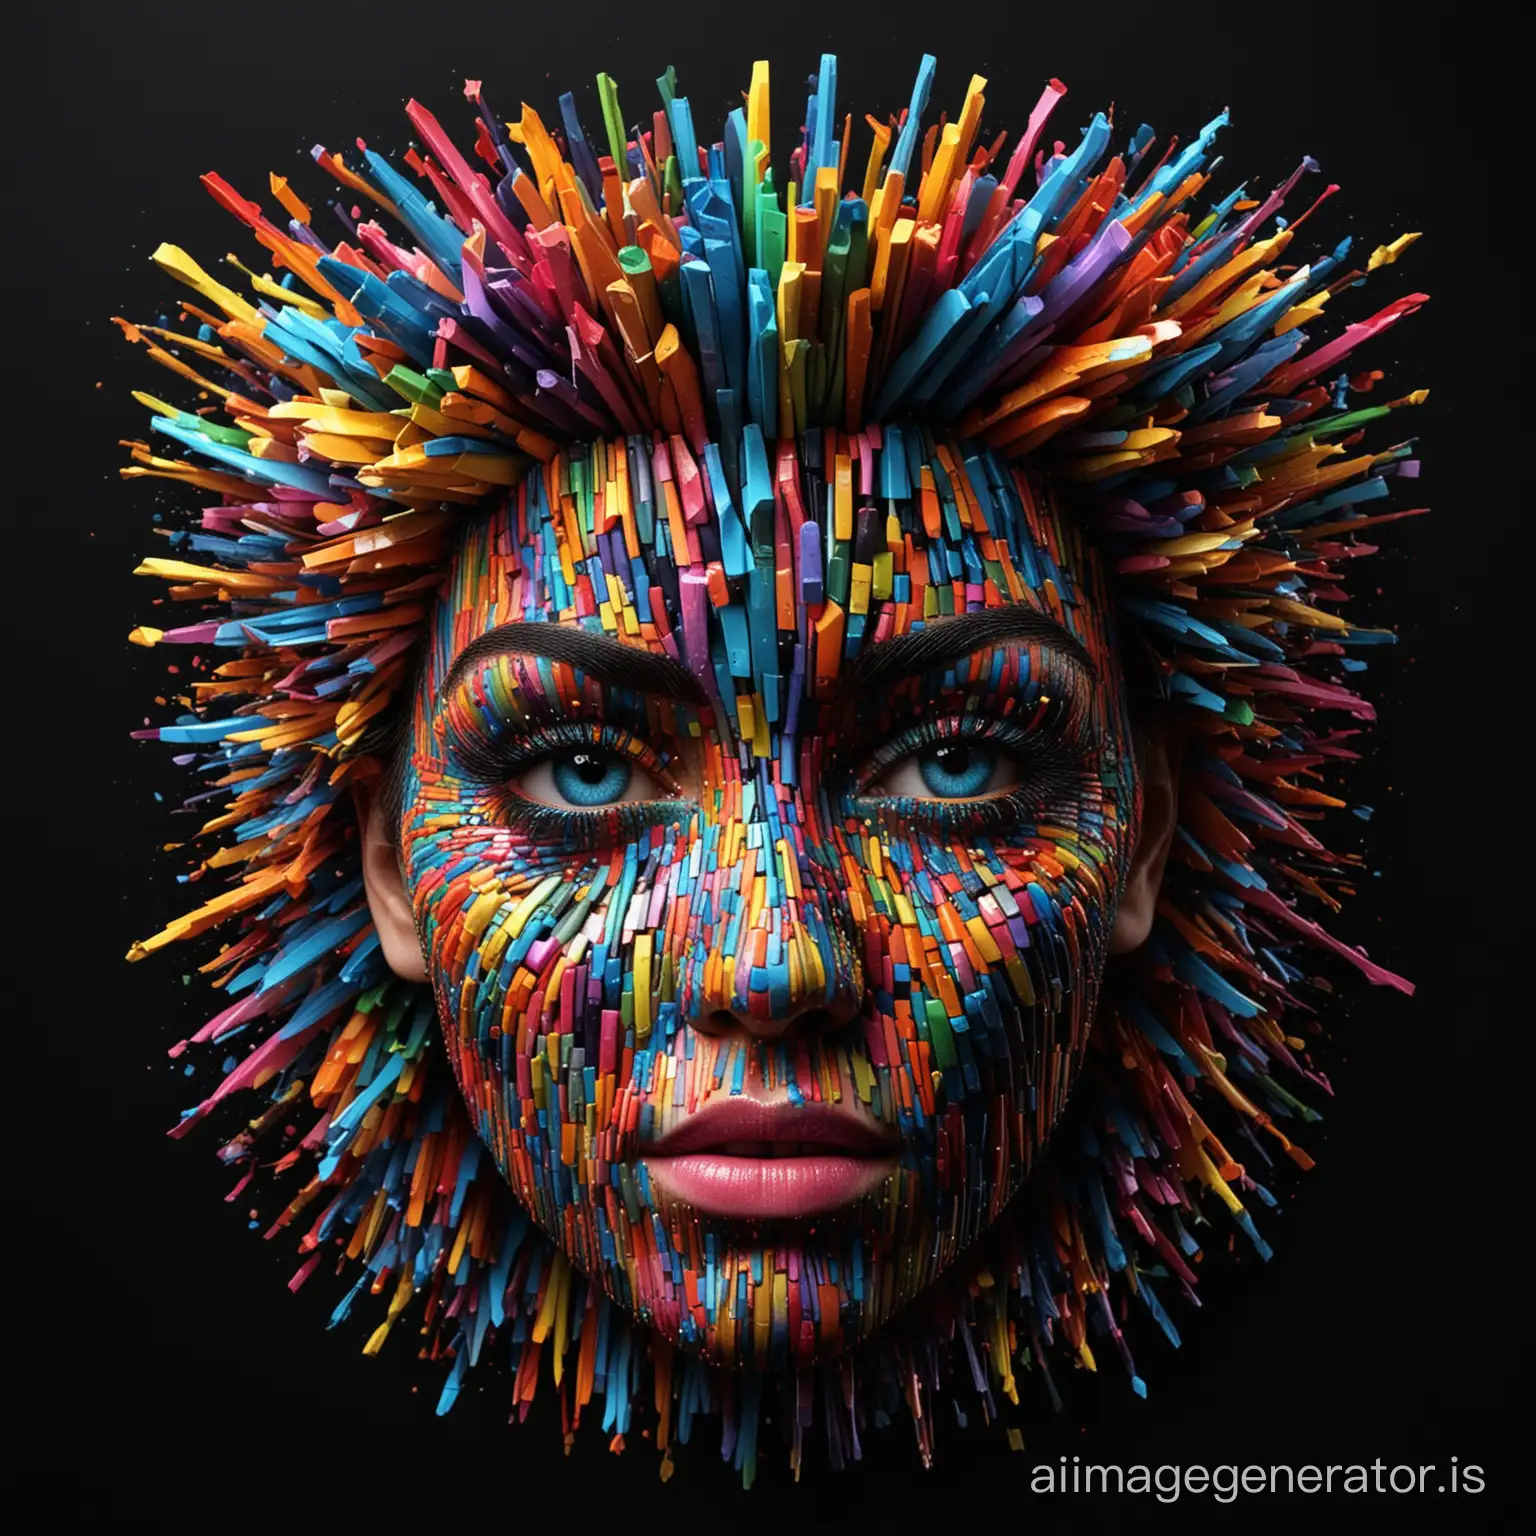 A colorful 3d girl face made from many colorful strikes in a black background.